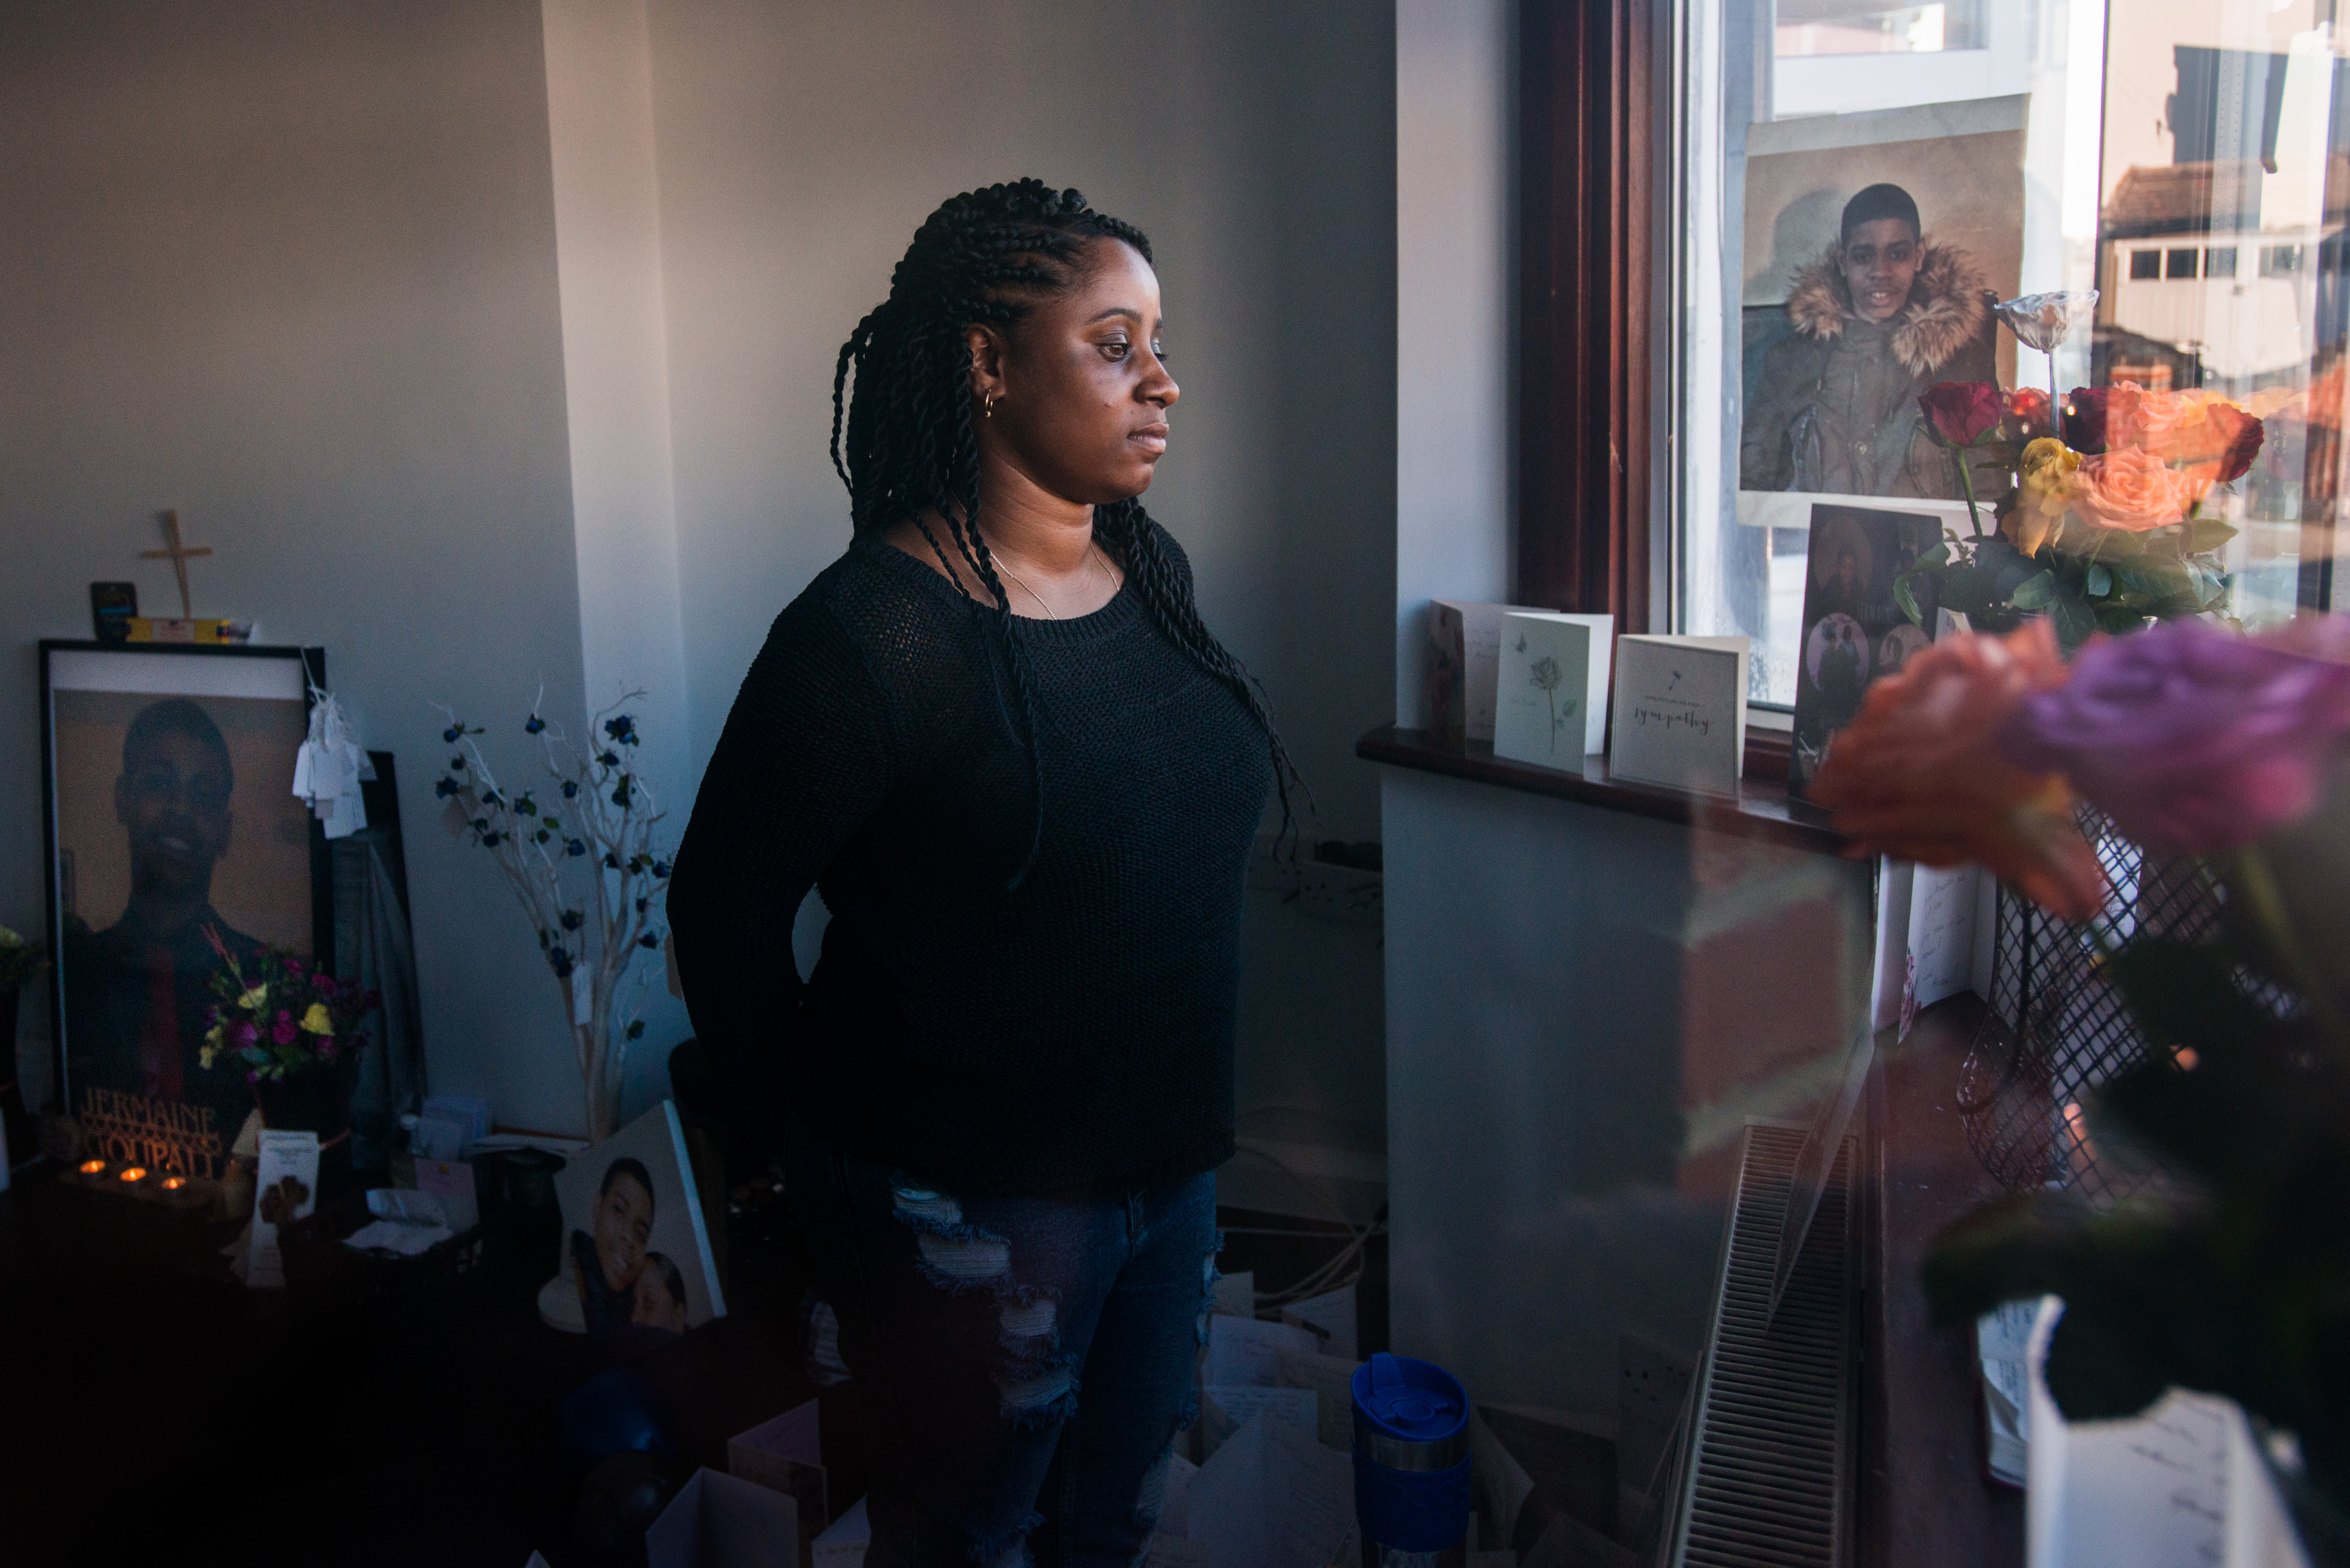 Goupall is seen through the window of her family&#39;s front room in Thornton Heath, south London. The room has become a shrine dedicated to honoring the life of her brother, Jermaine.